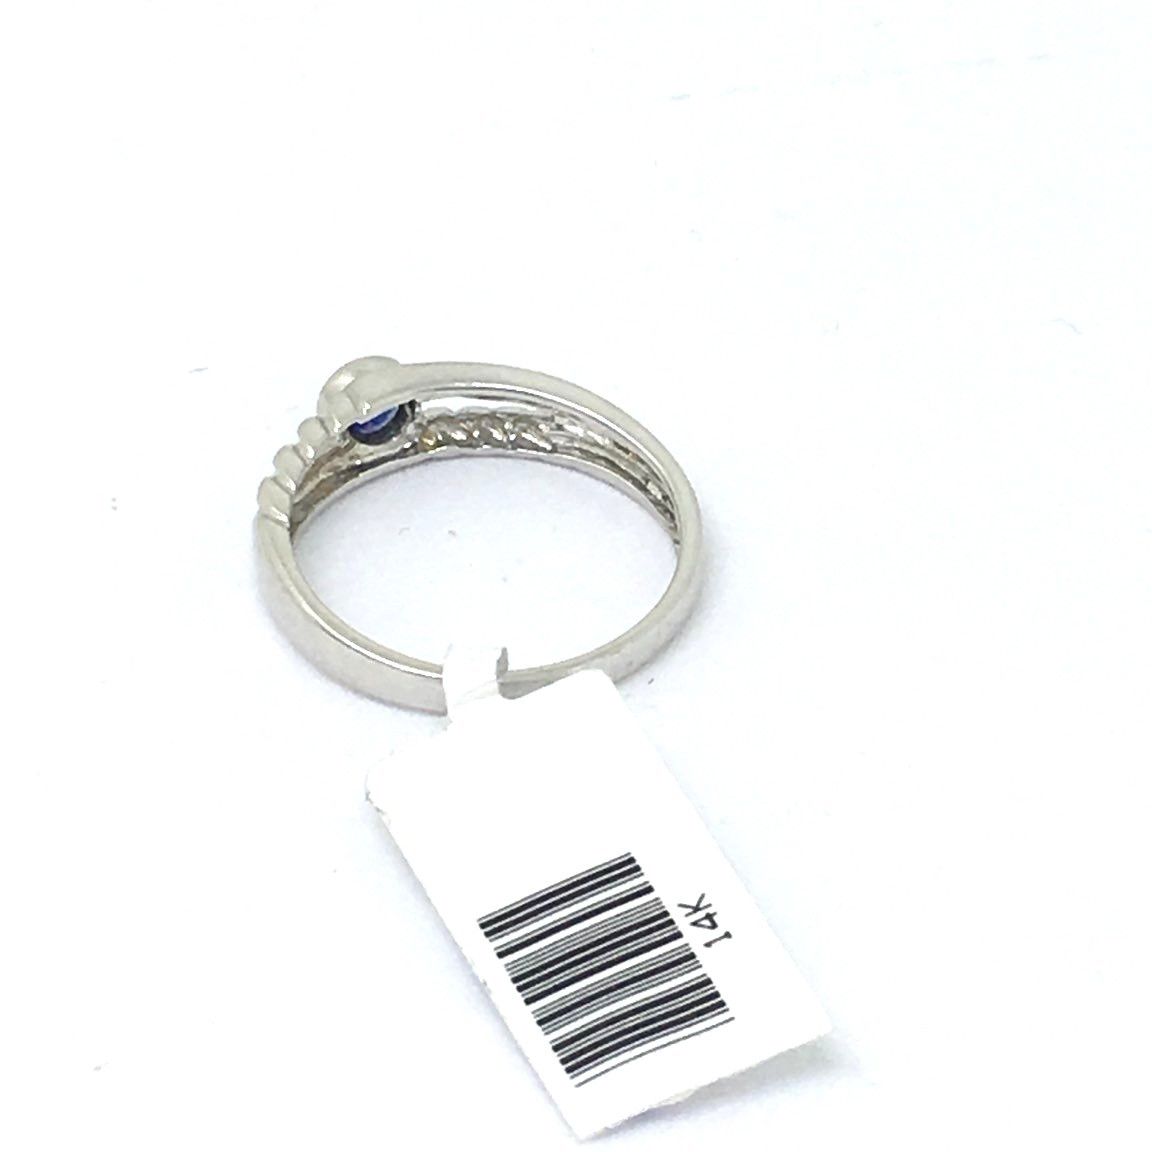 14K white gold and Genuine Round Sapphire Ring $400 NWT Size 6 3/4